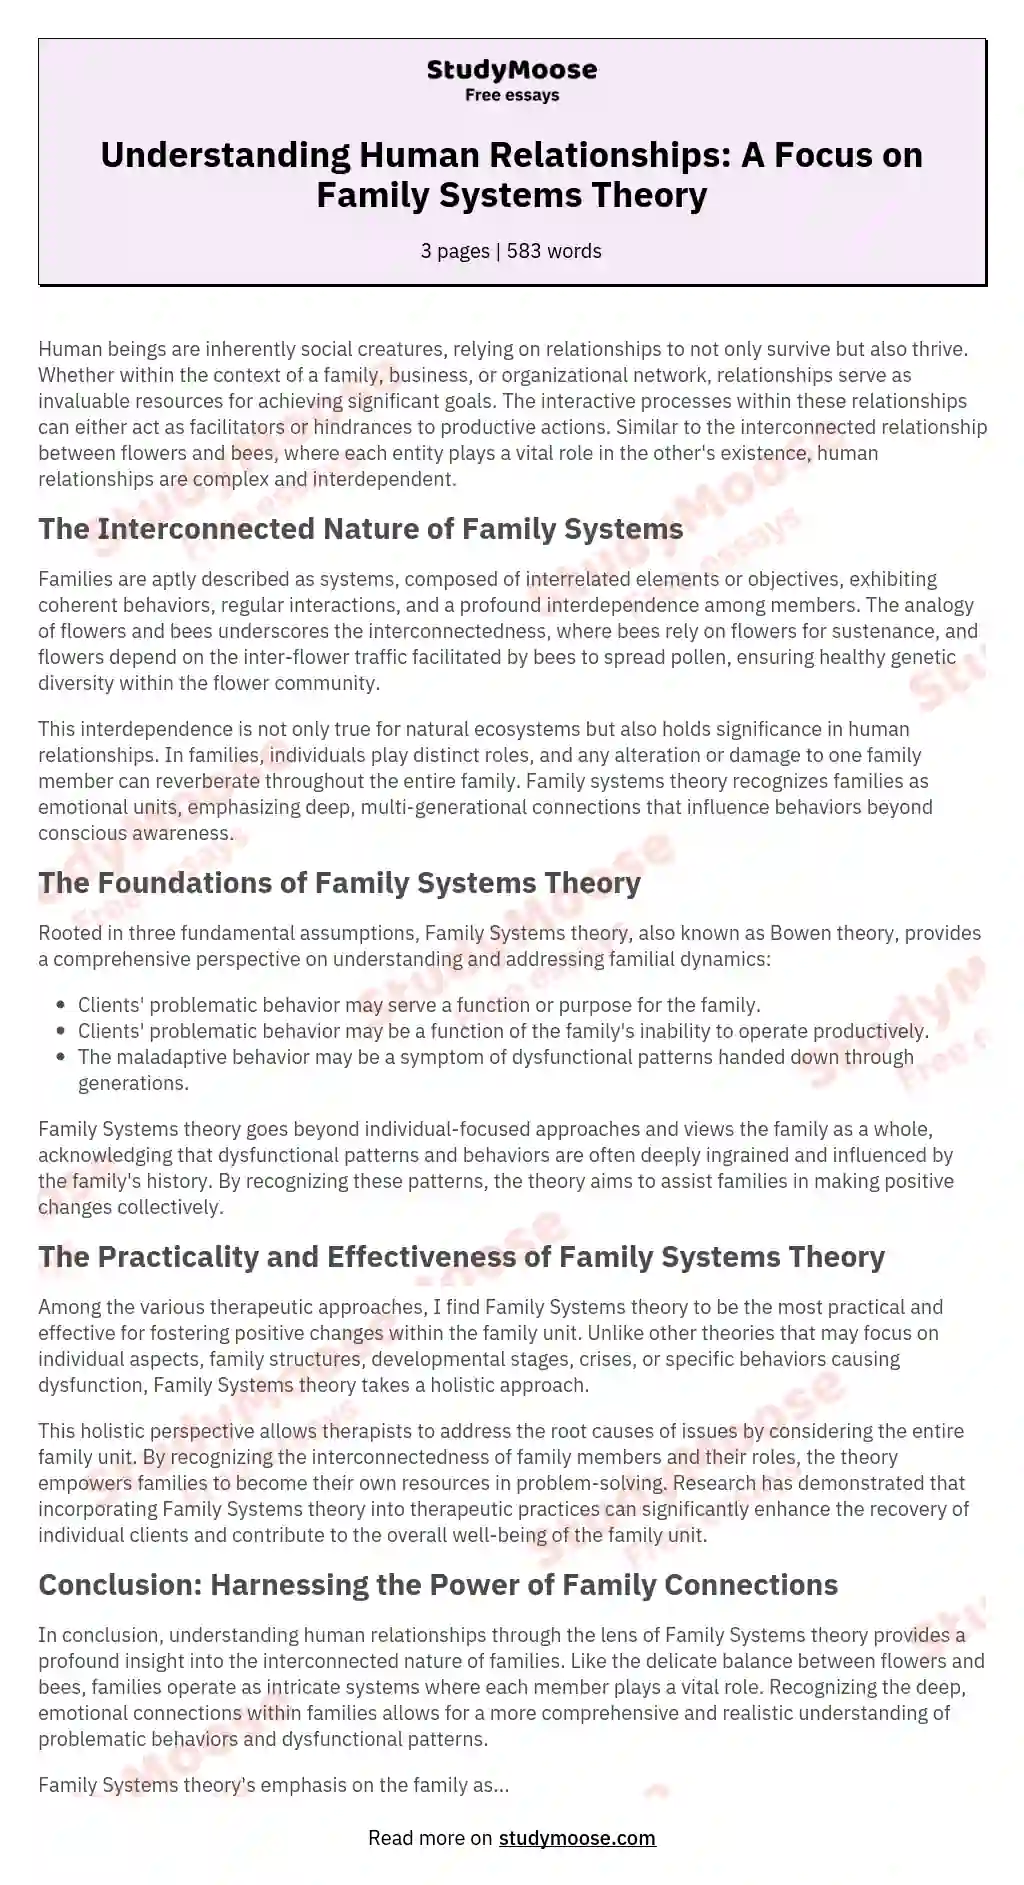 Understanding Human Relationships: A Focus on Family Systems Theory essay